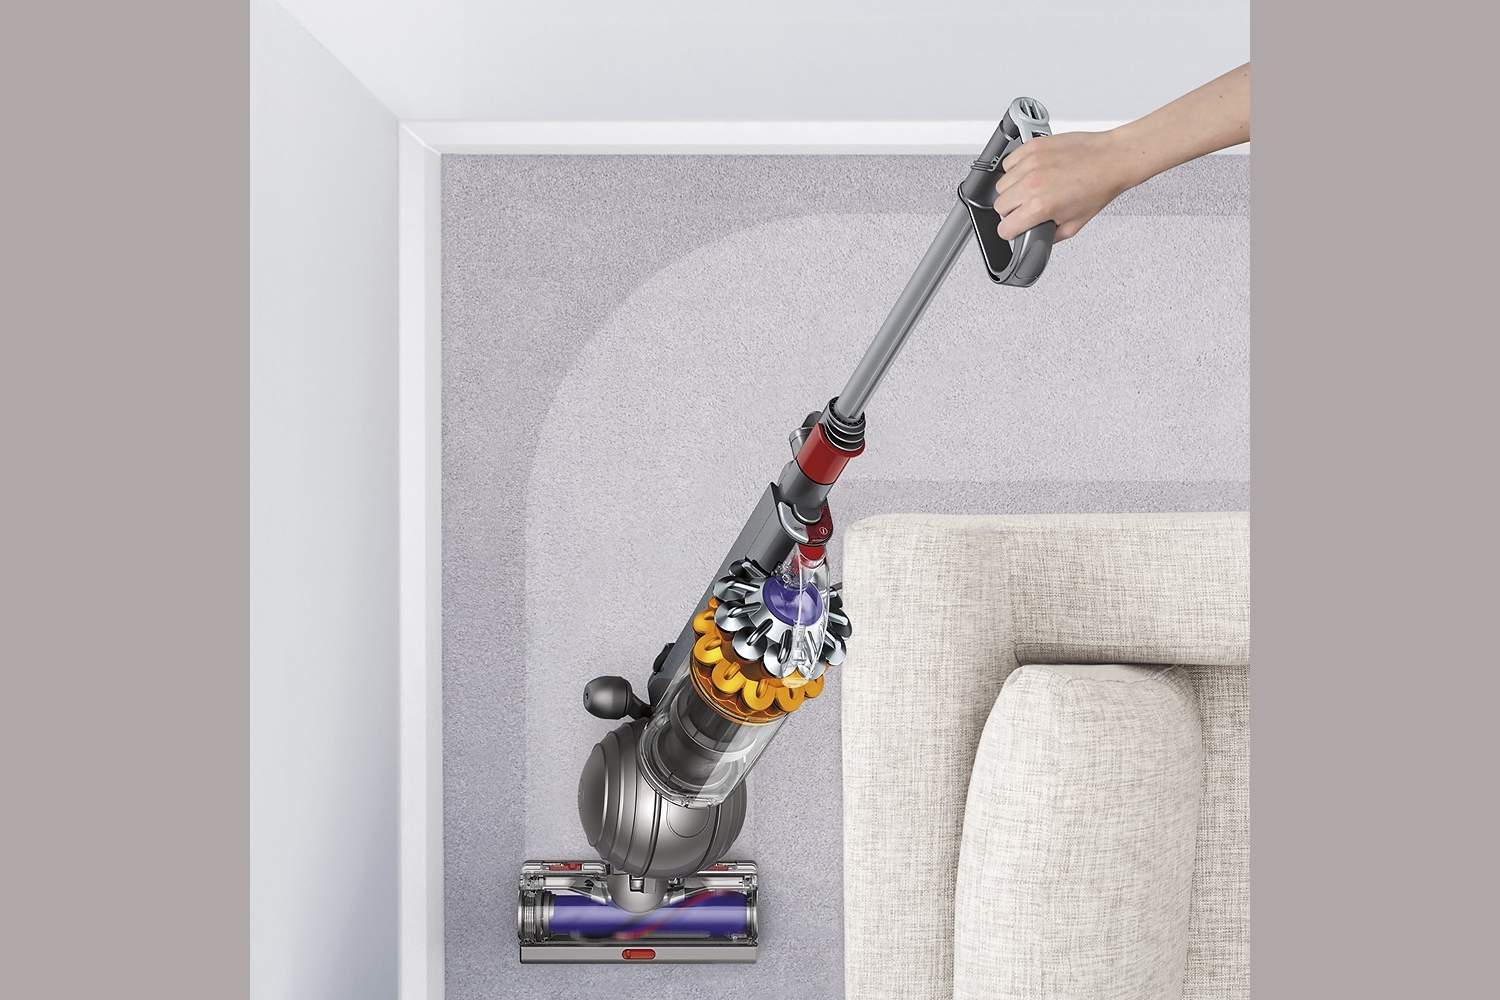 walmart slashes prices on dyson ball multi floor upright vacuums post prime day small vacuum 5